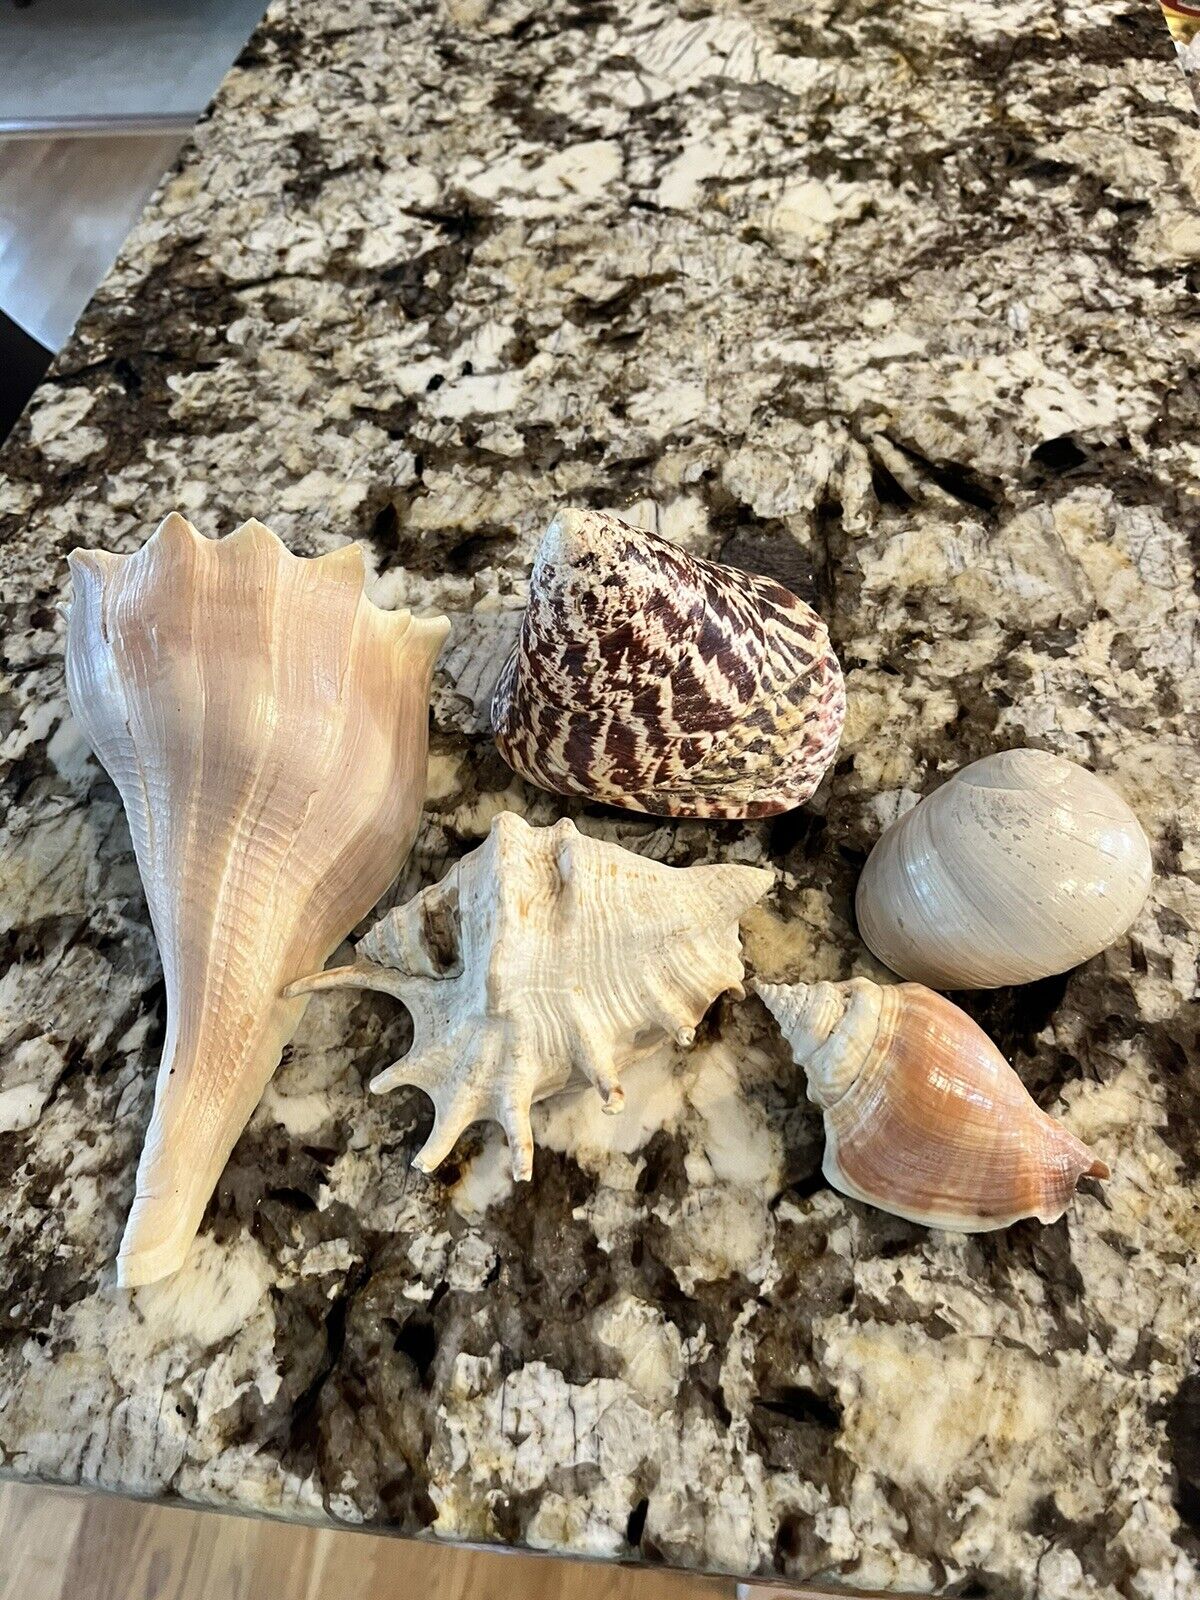 Vintage Seashell Conch Cone Spotted Turban Snail Knobbed Whelk Spider Conch Lot